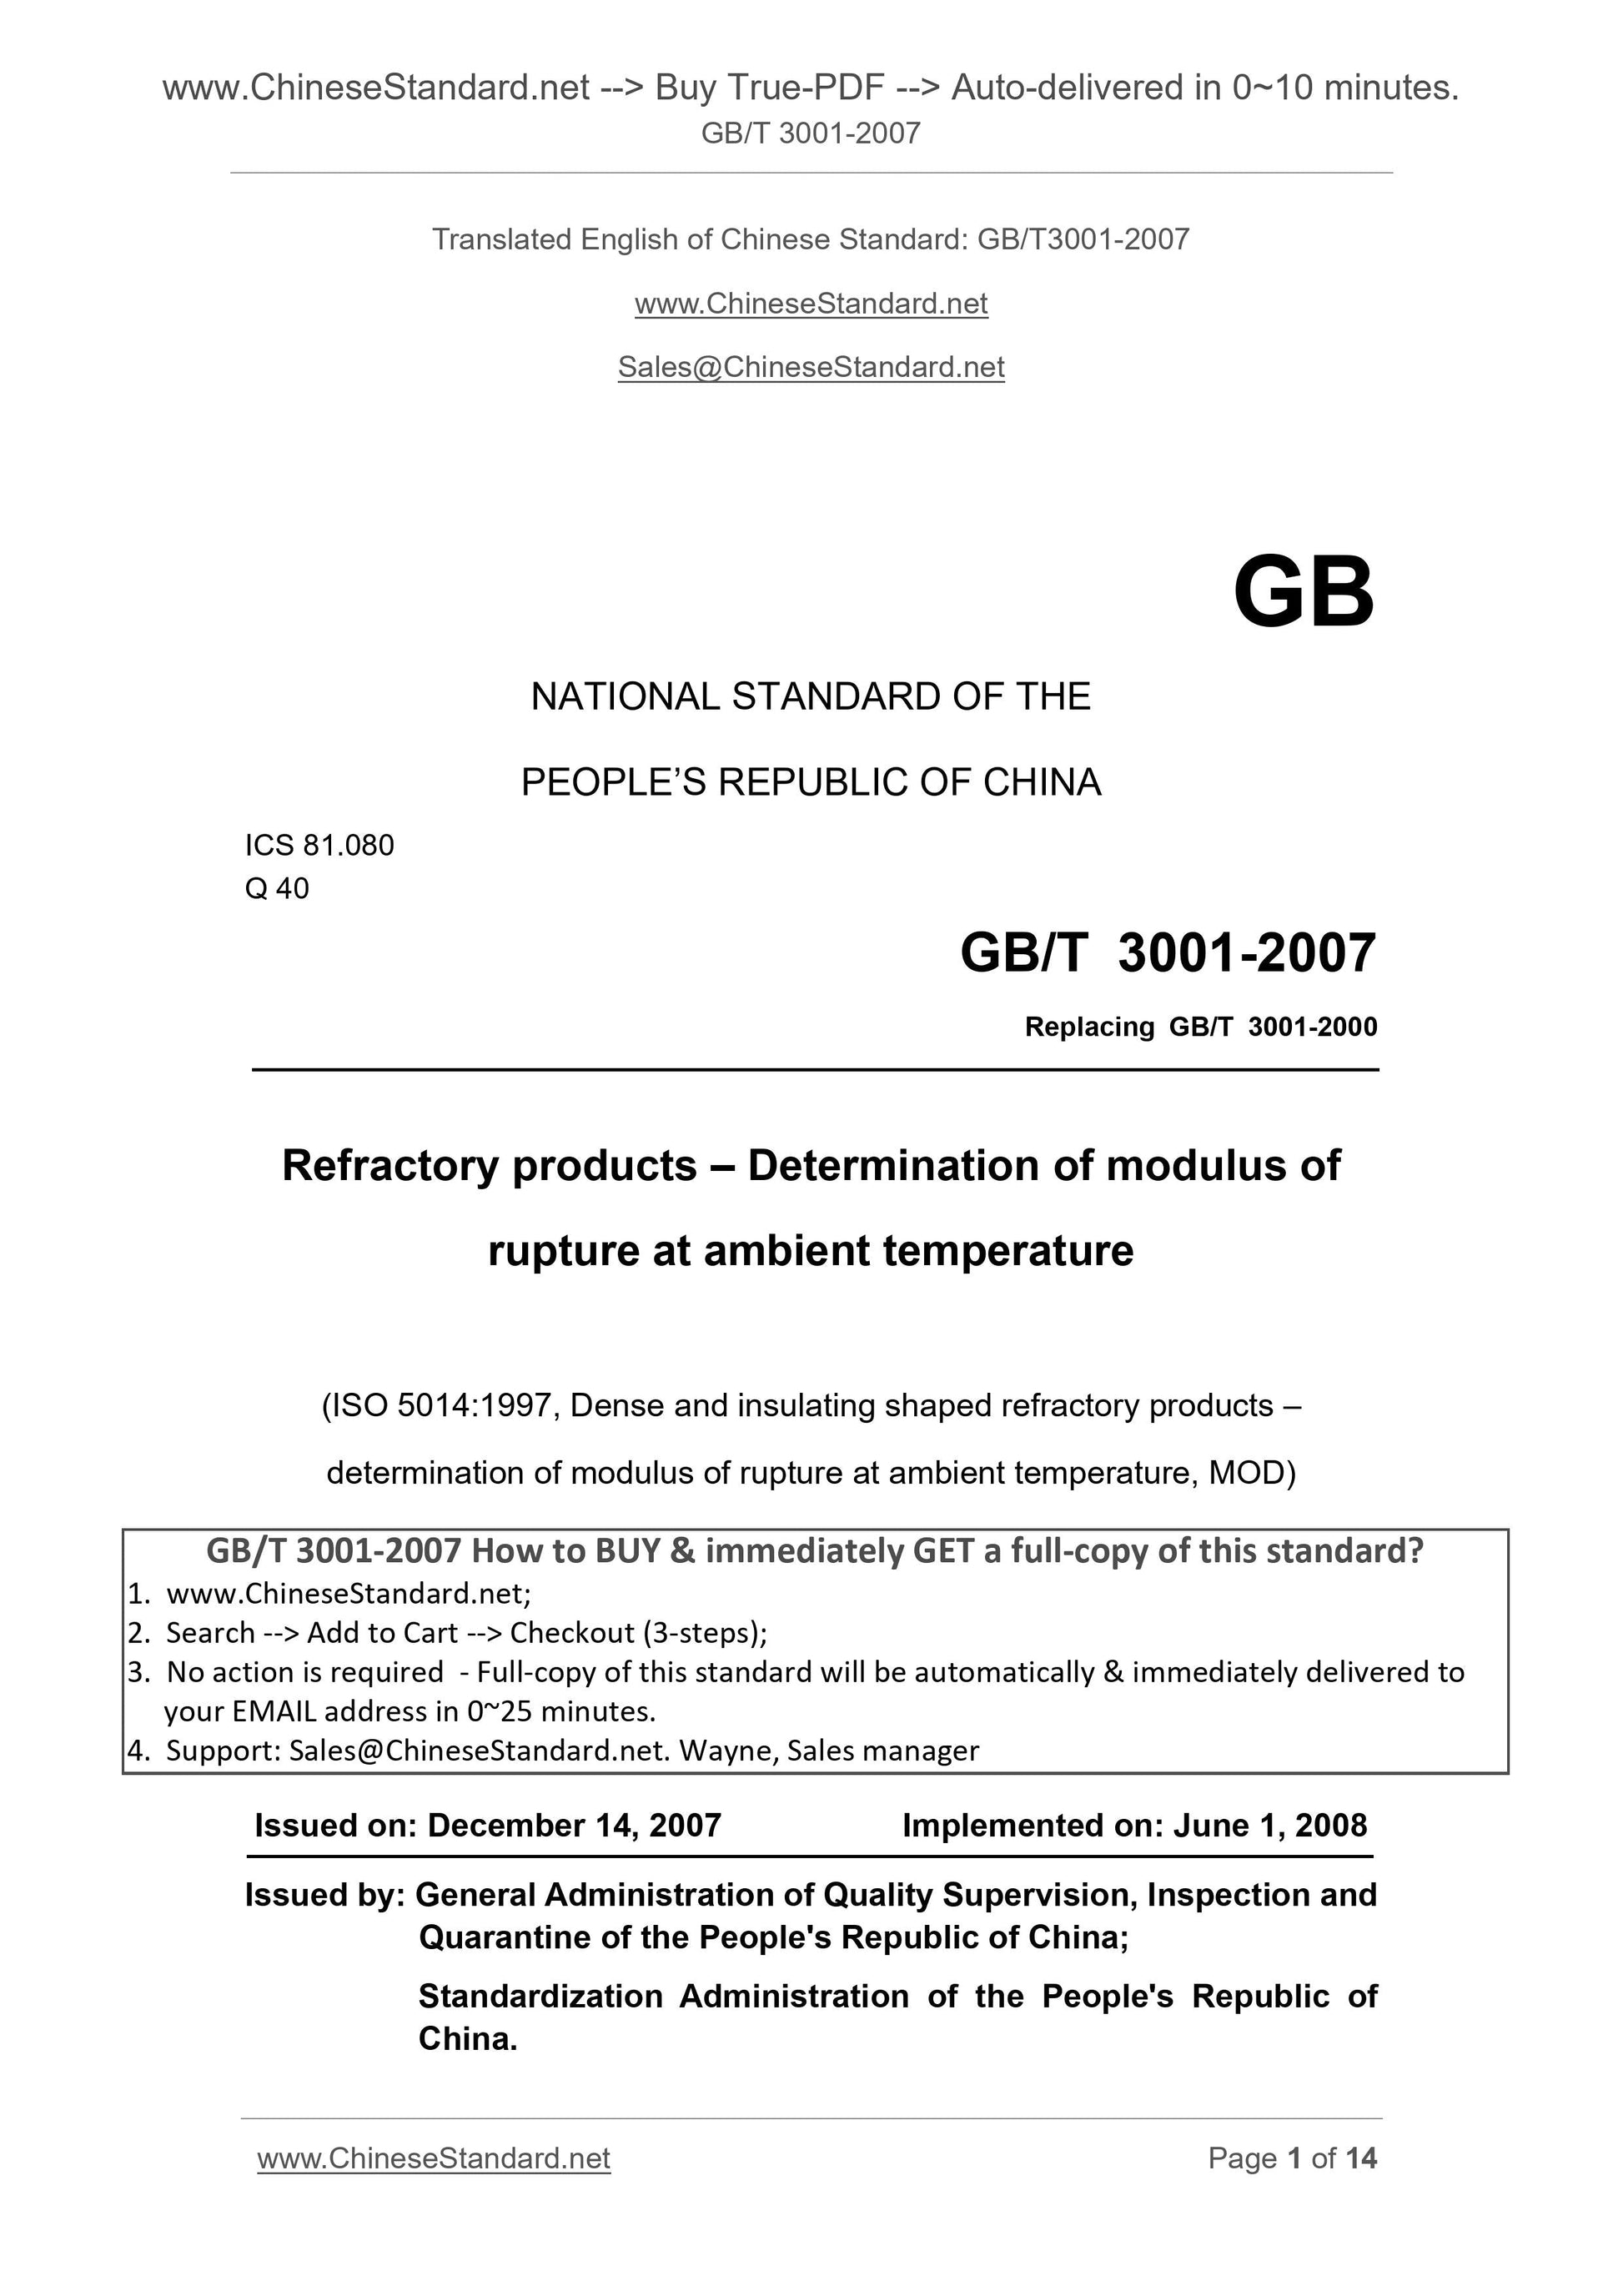 GB/T 3001-2007 Page 1